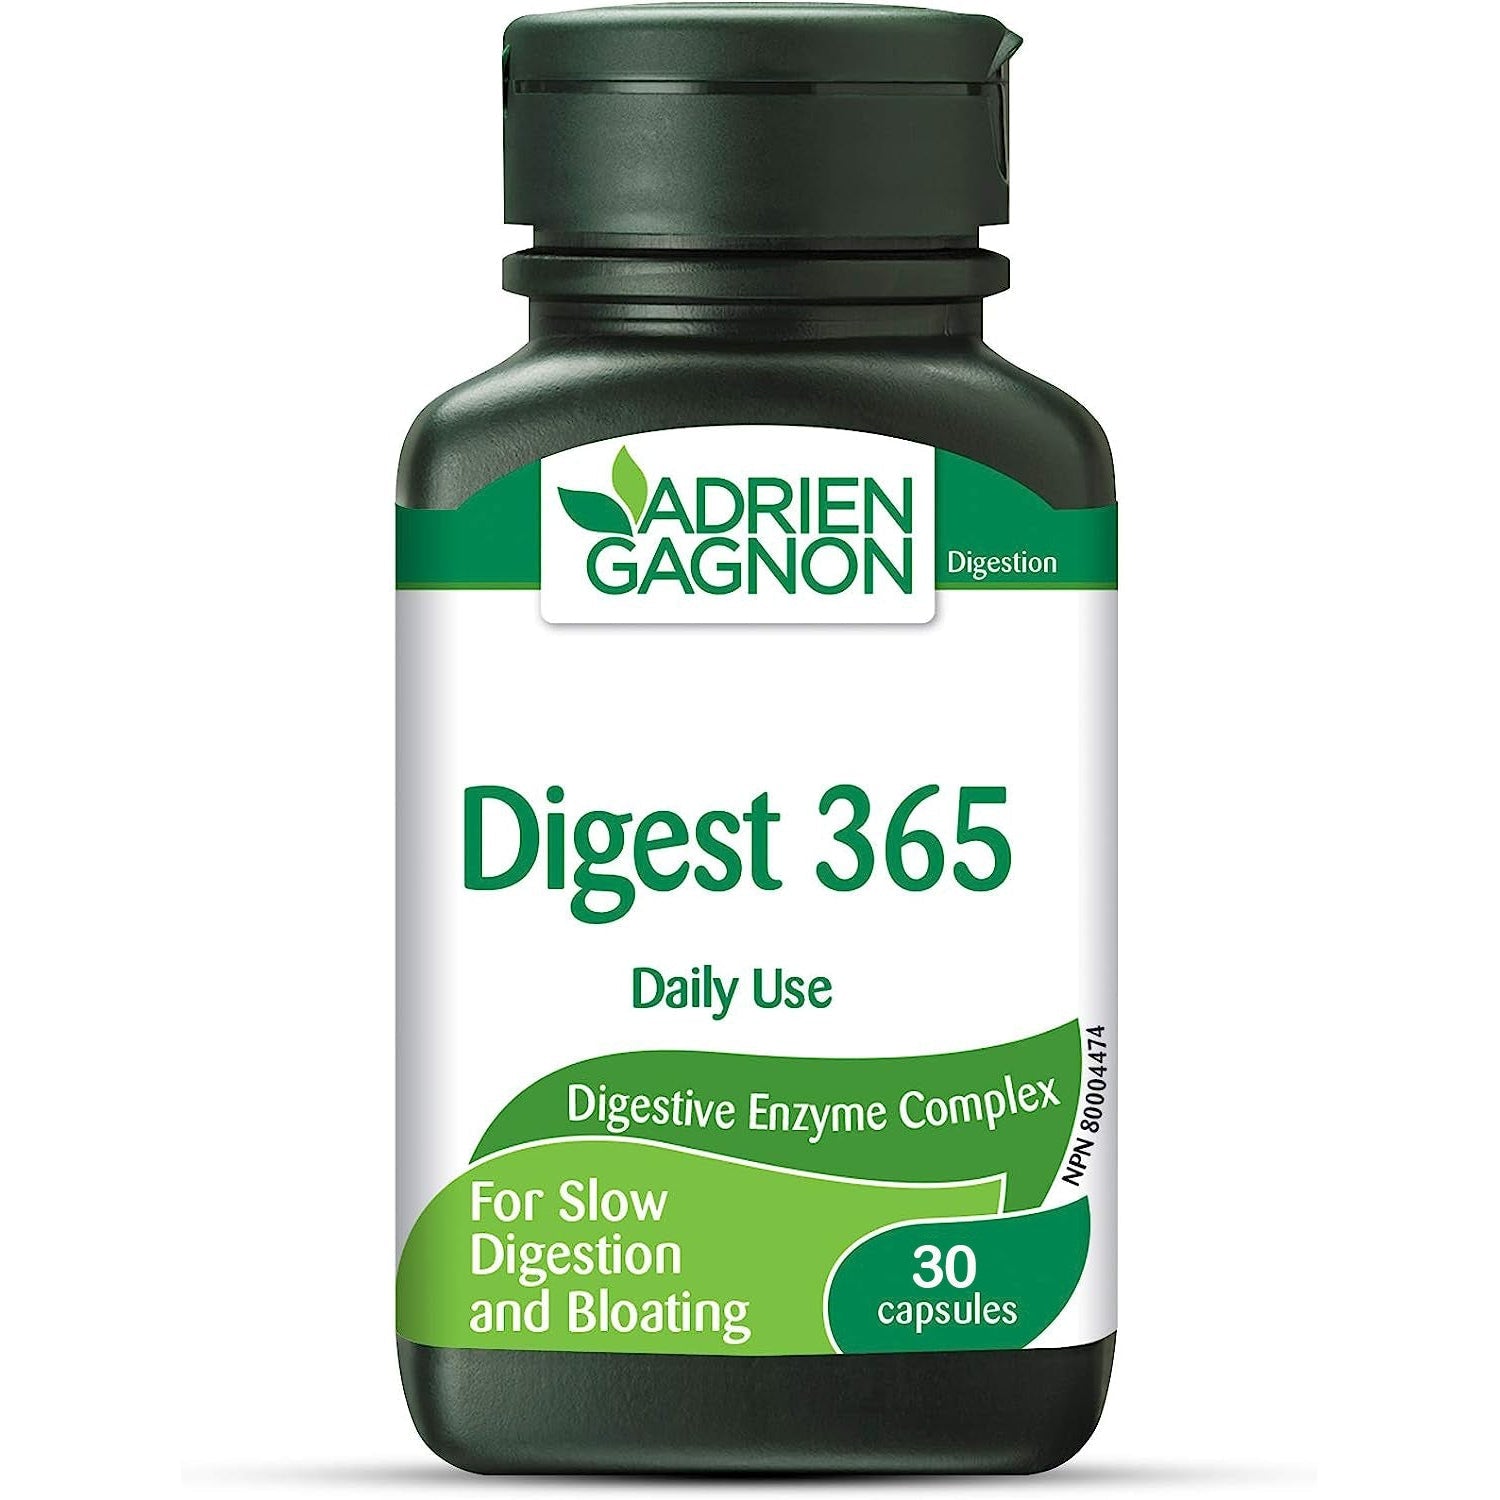 Adrien Gagnon Digest 365 Natural Digestive Enzymes Complex Vegan Gluten Free Dairy Free 30 capsules